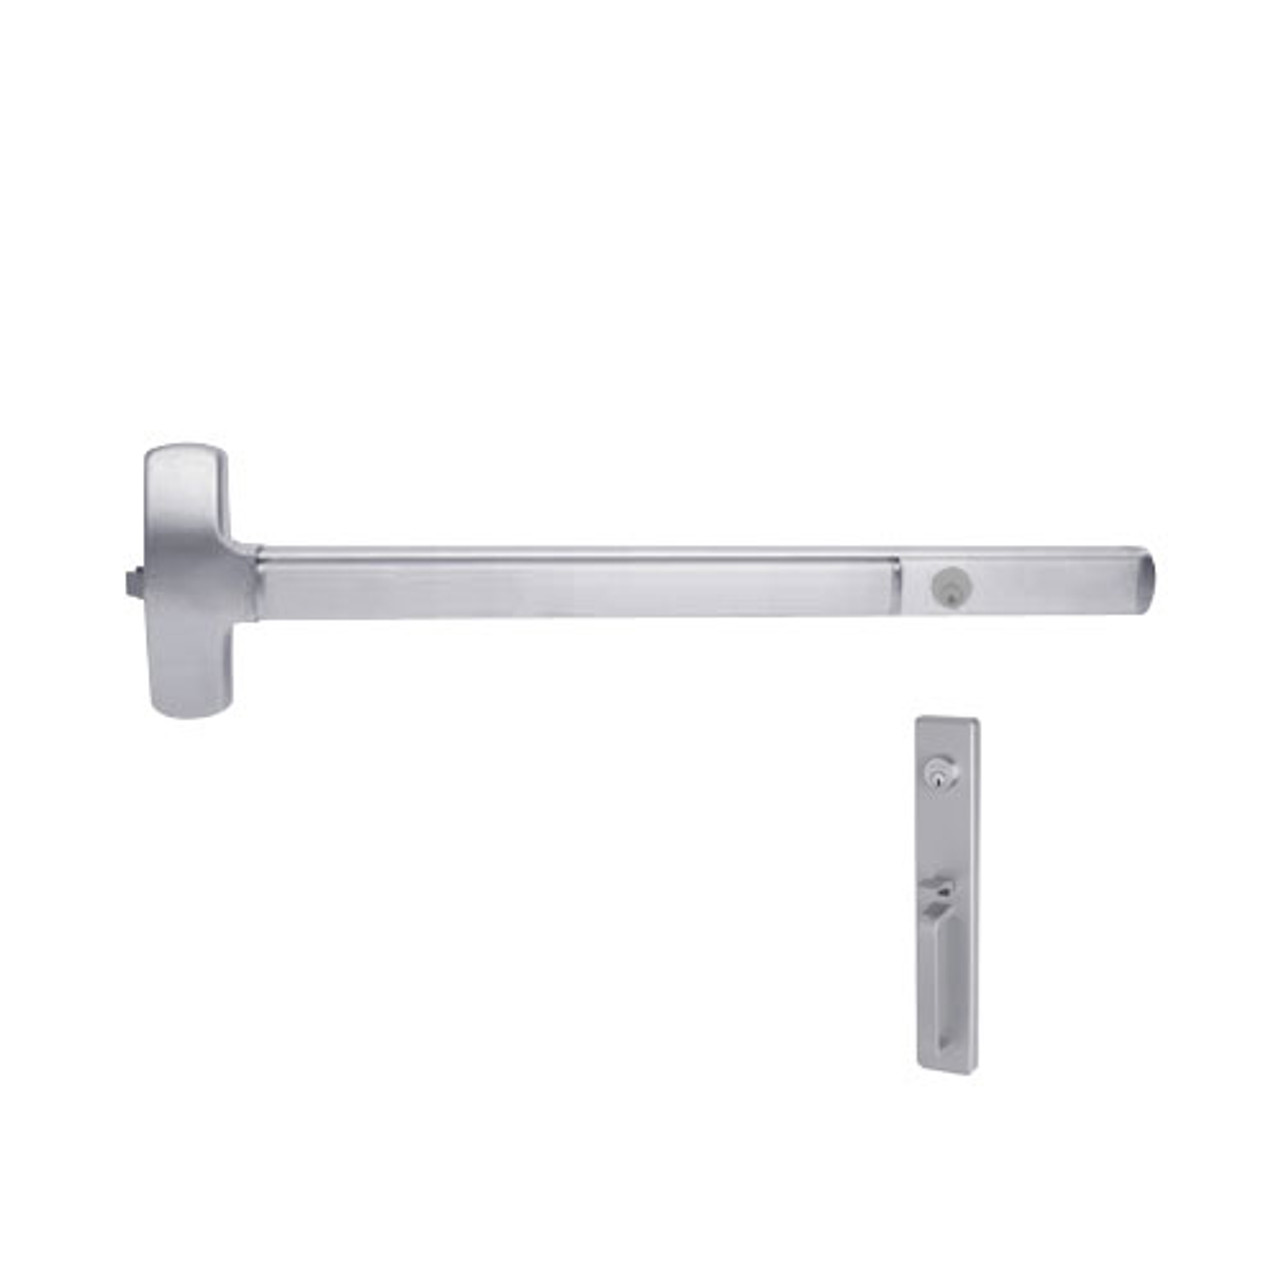 CD25-R-TP-US32-4 Falcon Exit Device in Polished Stainless Steel